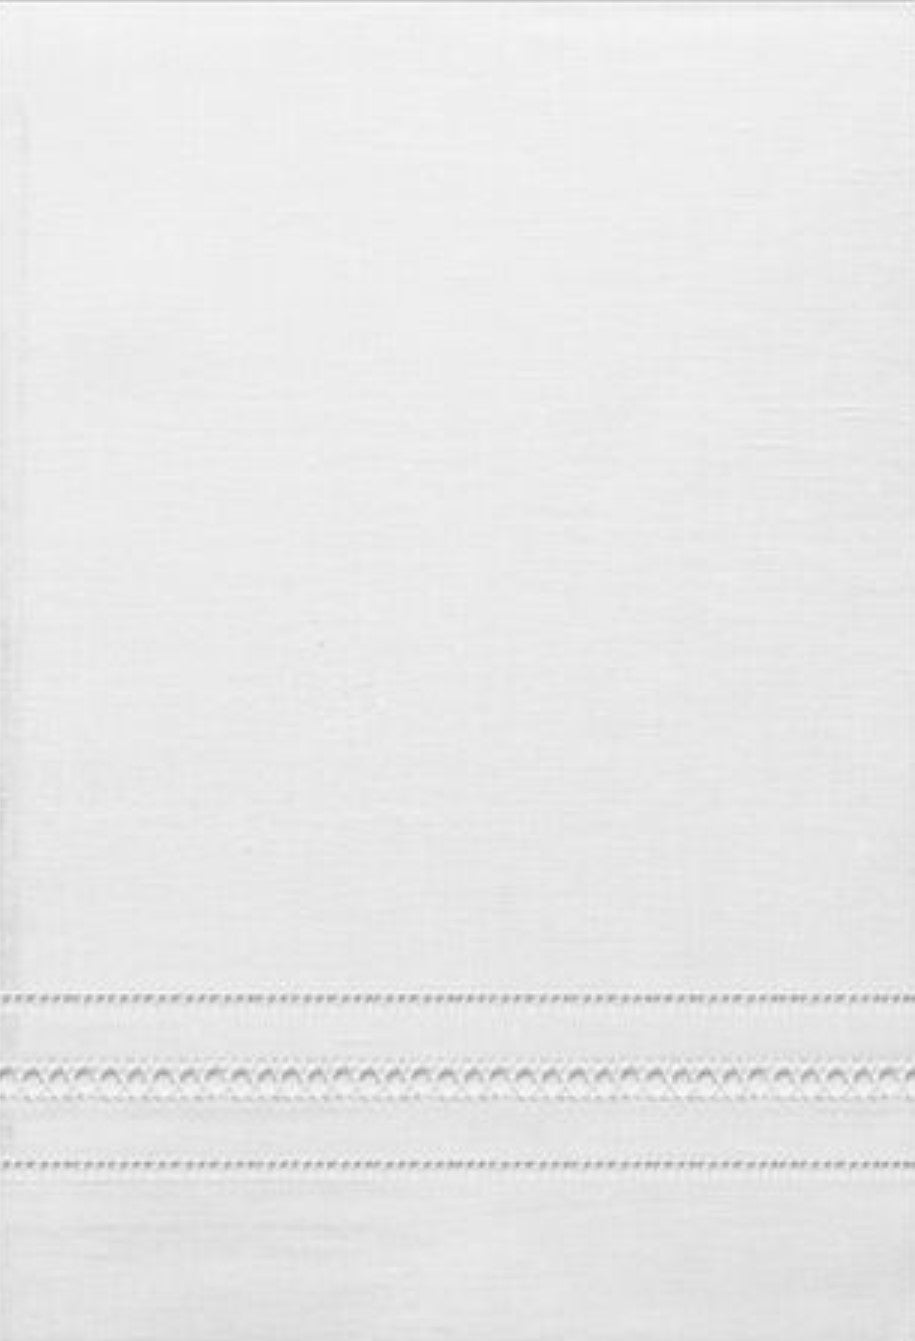 Double Hemstitched Guest Towels with Classic Gilucci Stitching, White Color